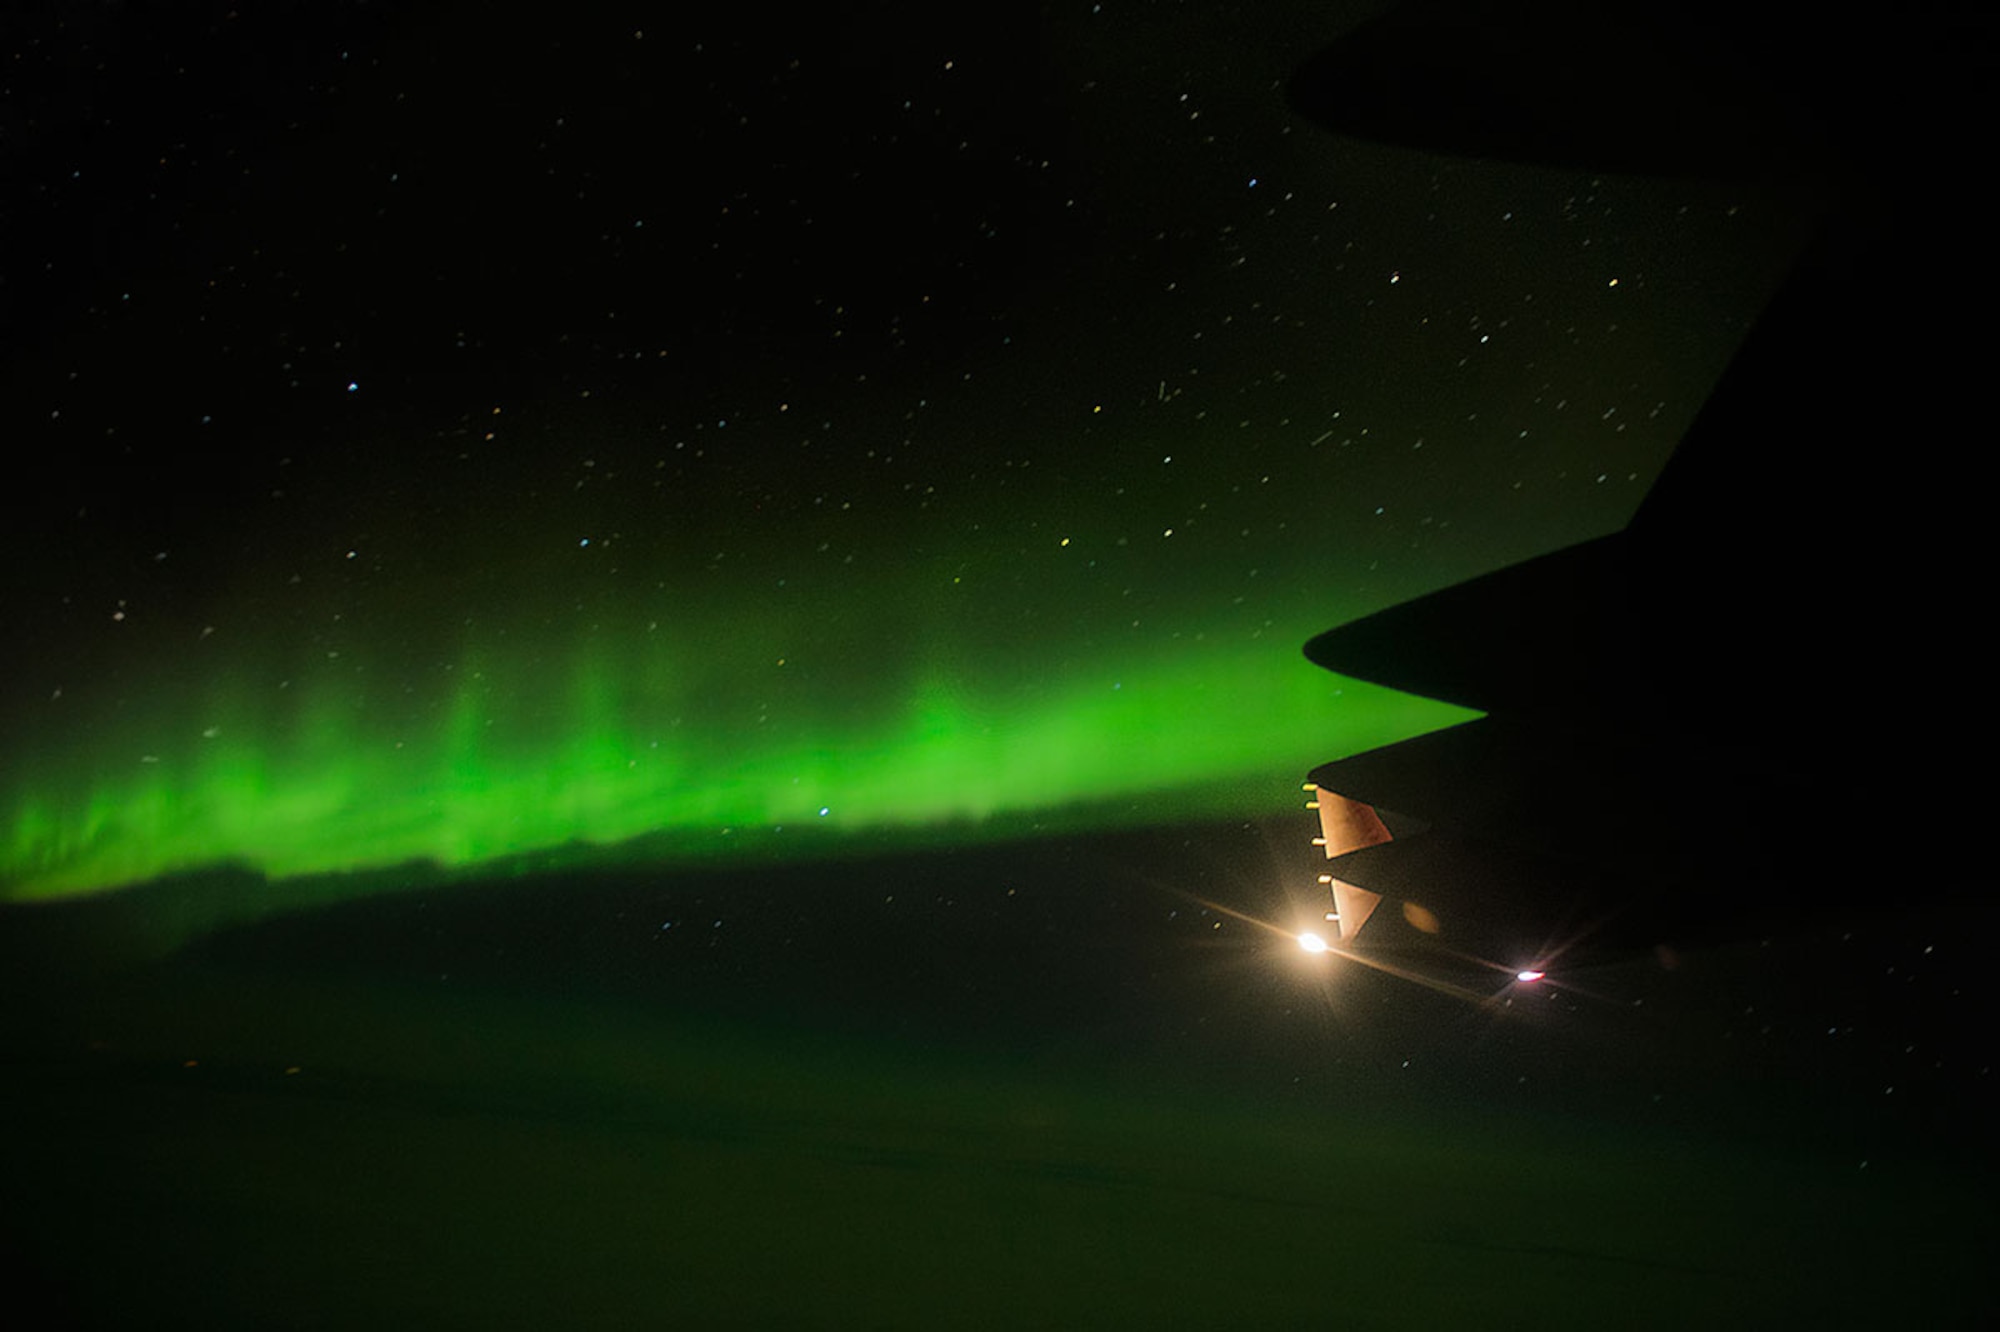 The aurora borealis is seen as a U.S. Air Force C-17 Globemaster III flies over Alaska during Operation Cobra Gold 2014, Jan. 13, 2014.   CG14  in its 33rd iteration, demonstrates the U.S. and the Kingdom of Thailand's commitment to their long-standing alliance and regional partnership, prosperity and security in the Asia-Pacific region.  (U.S. Air Force photo by Senior Airman James Richardson/ Released)